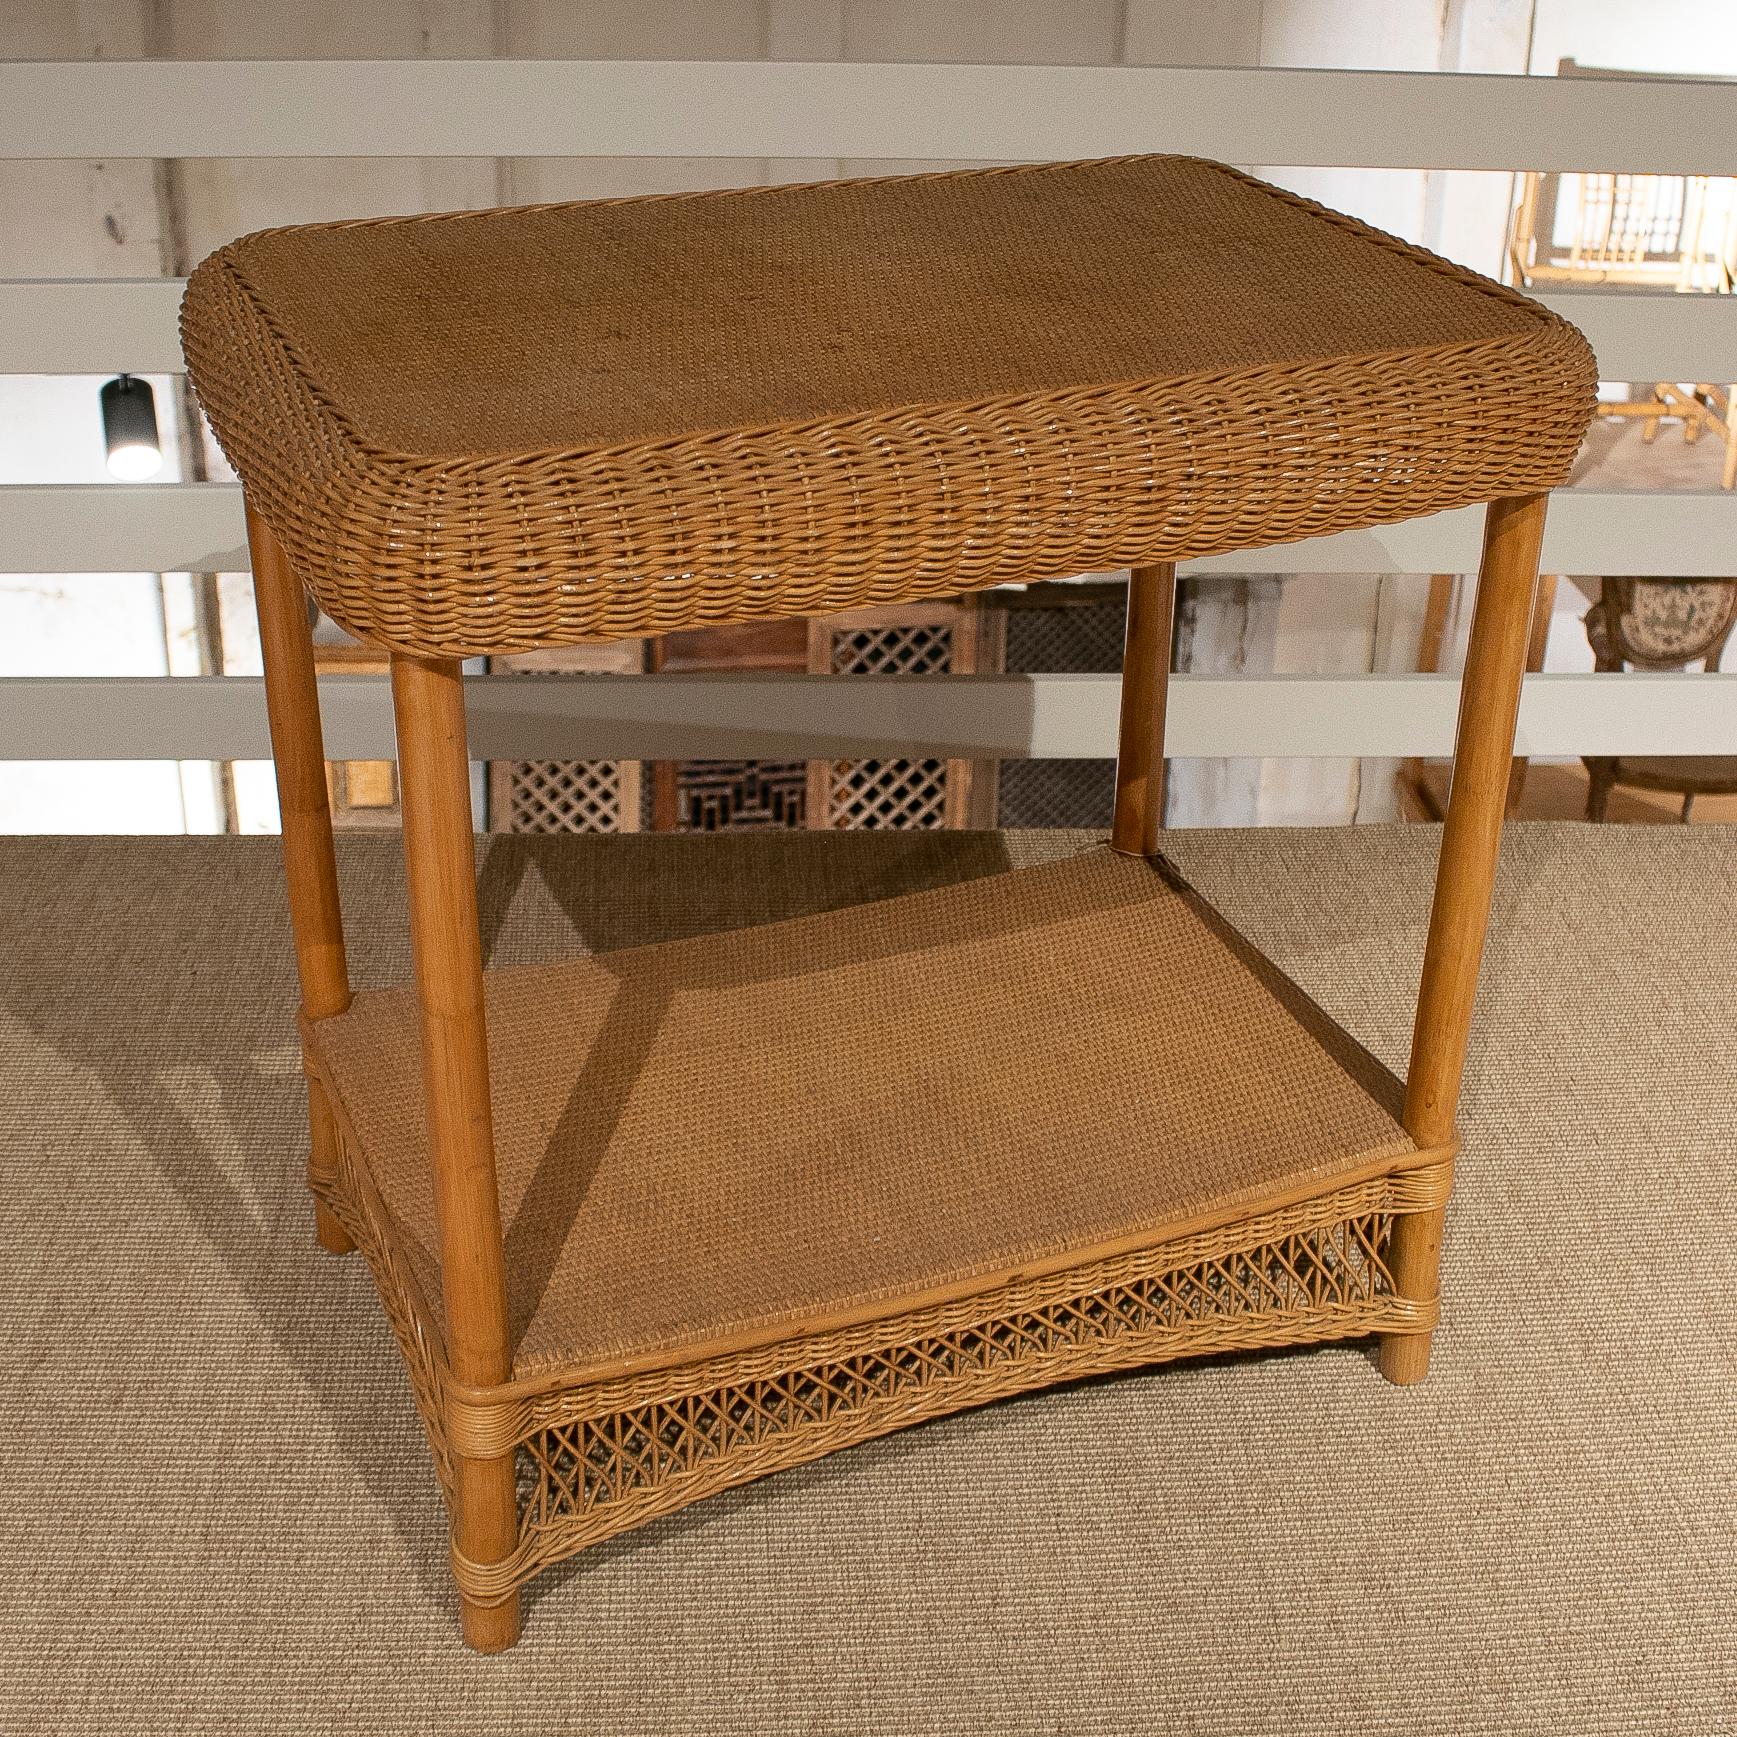 Vintage Spanish 1970s hand woven wicker and bamboo side table with low shelf.